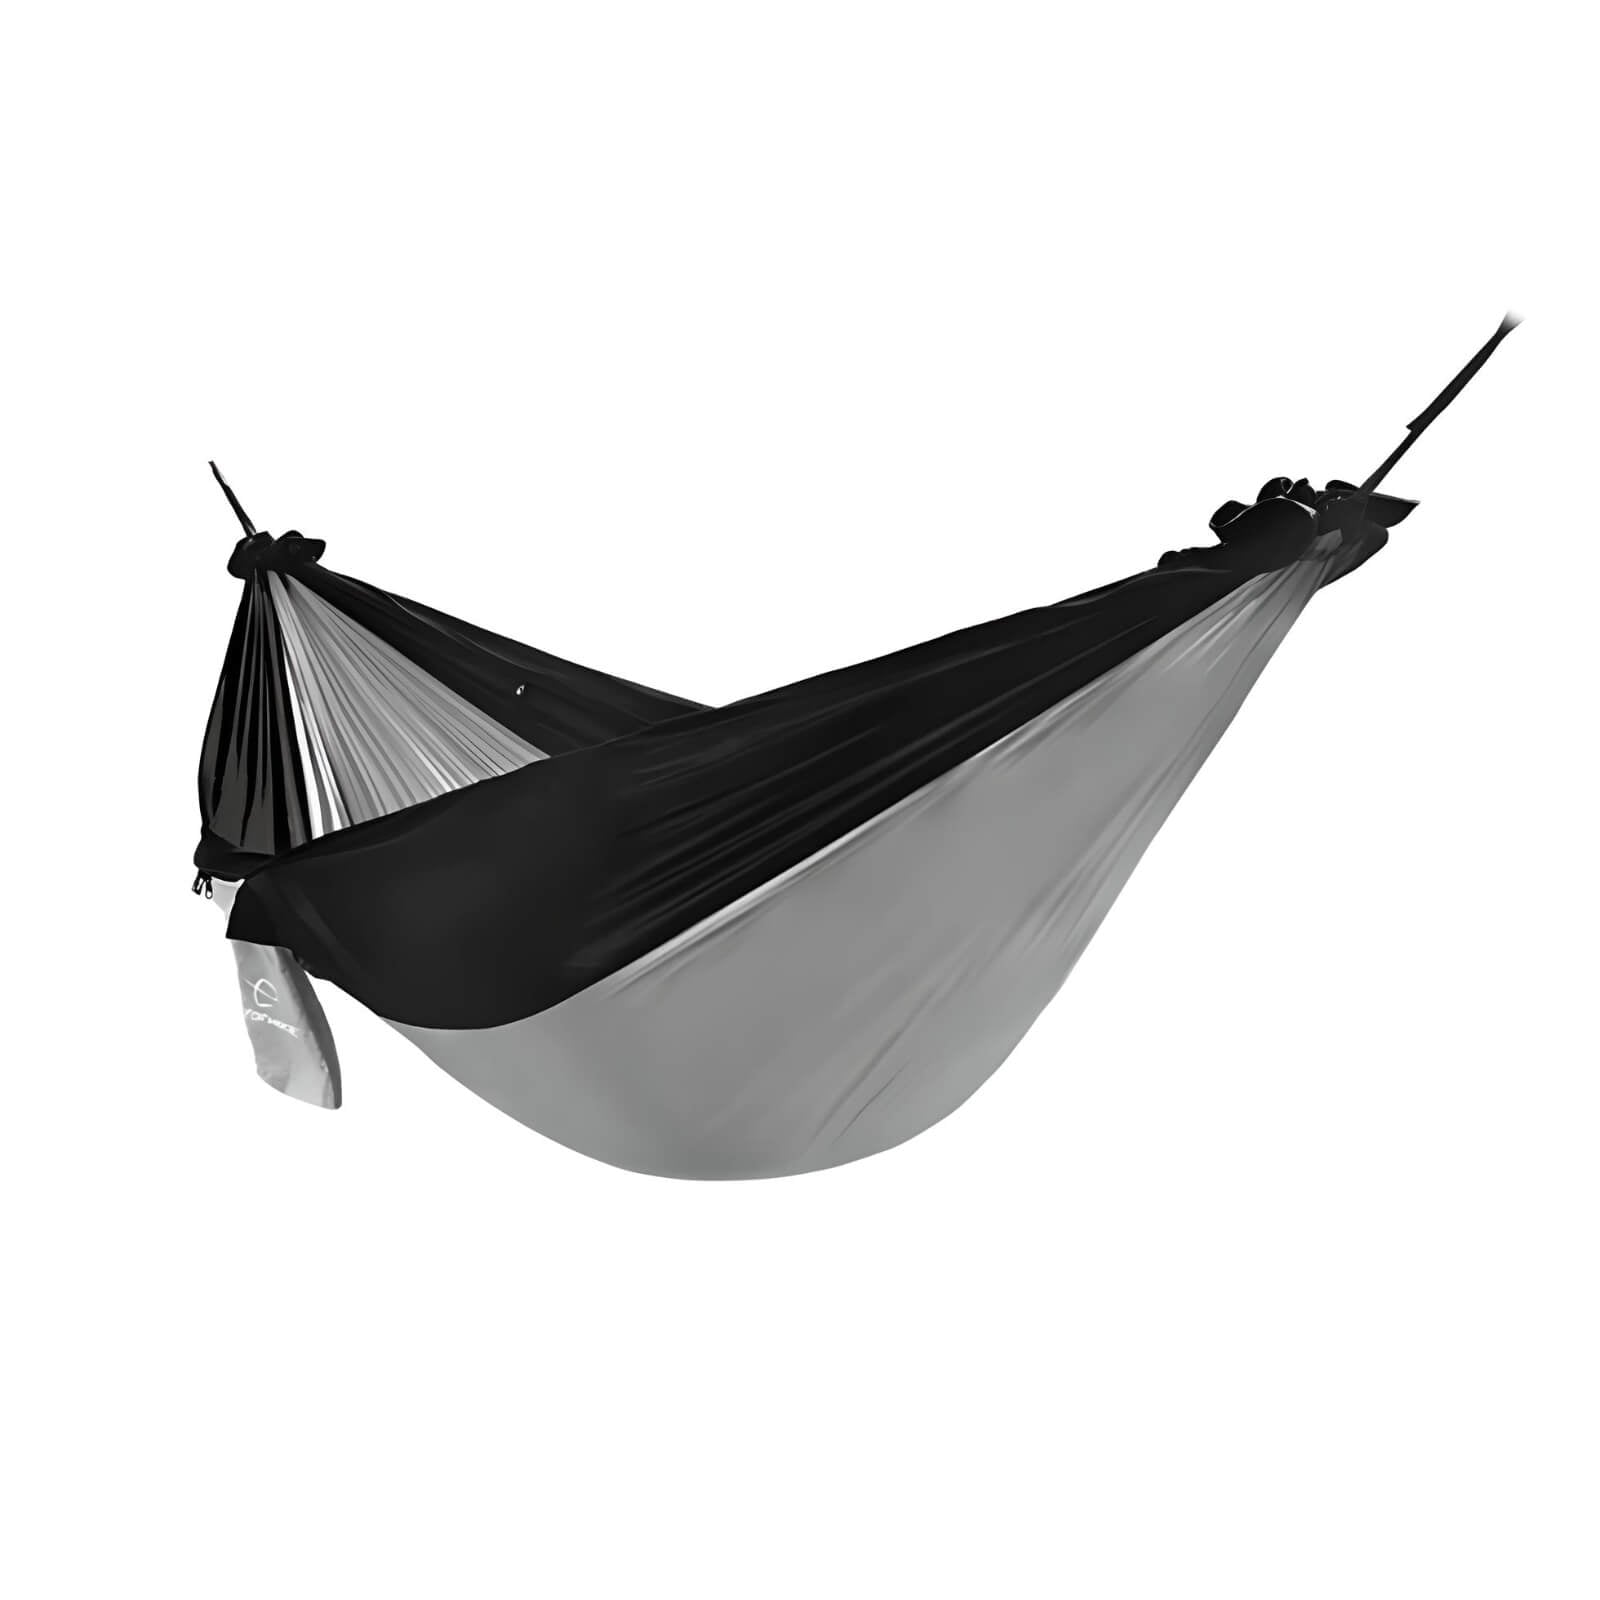 hammock-with-mosquito-net-and-rainfly-demo